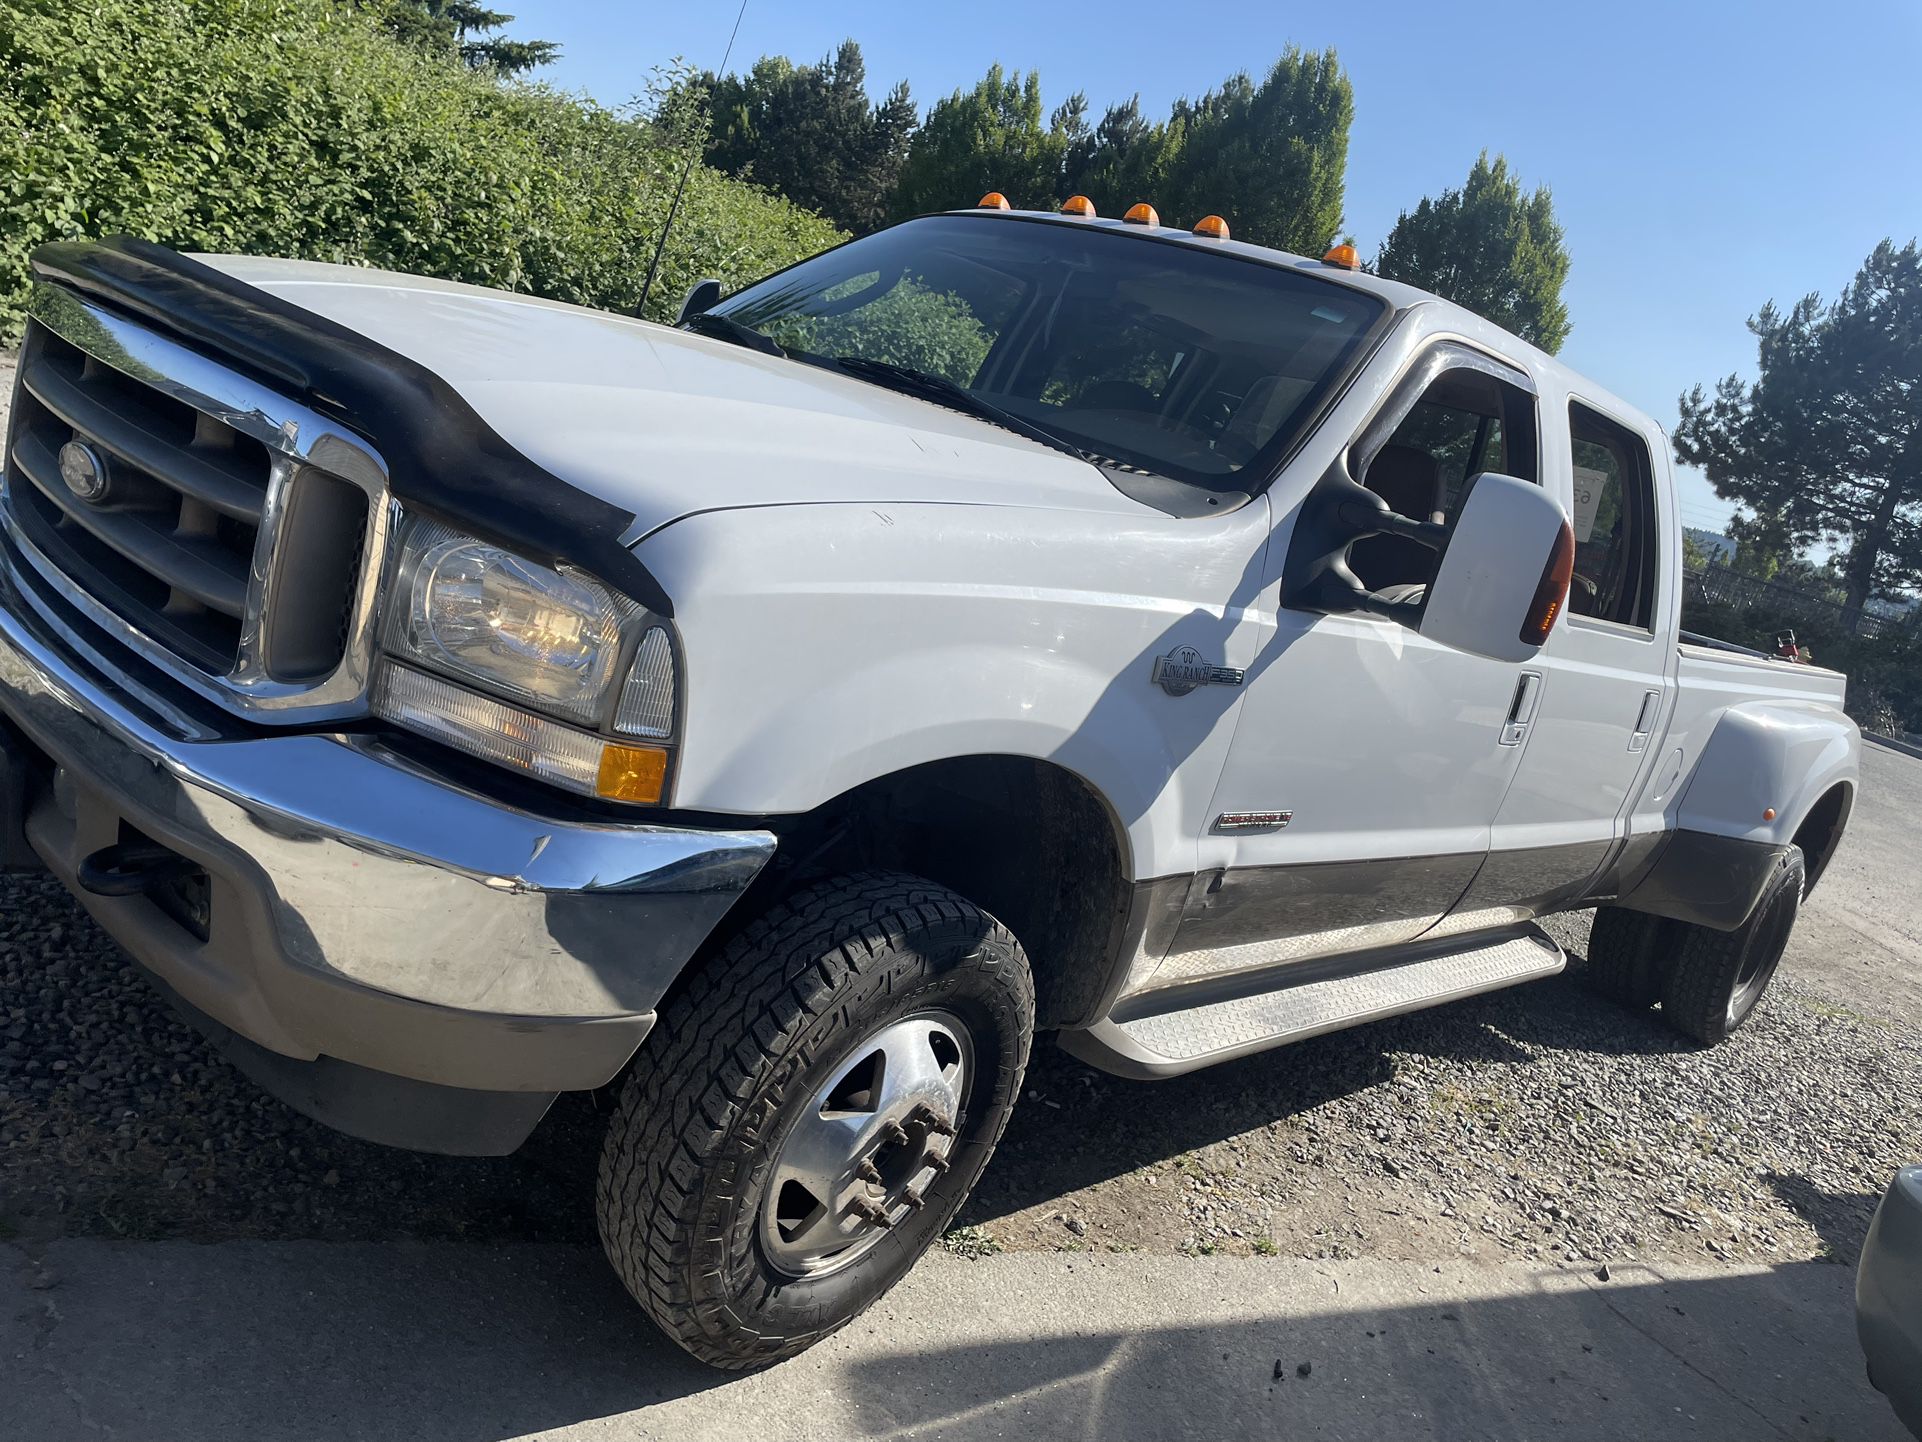 2003 Ford F-350